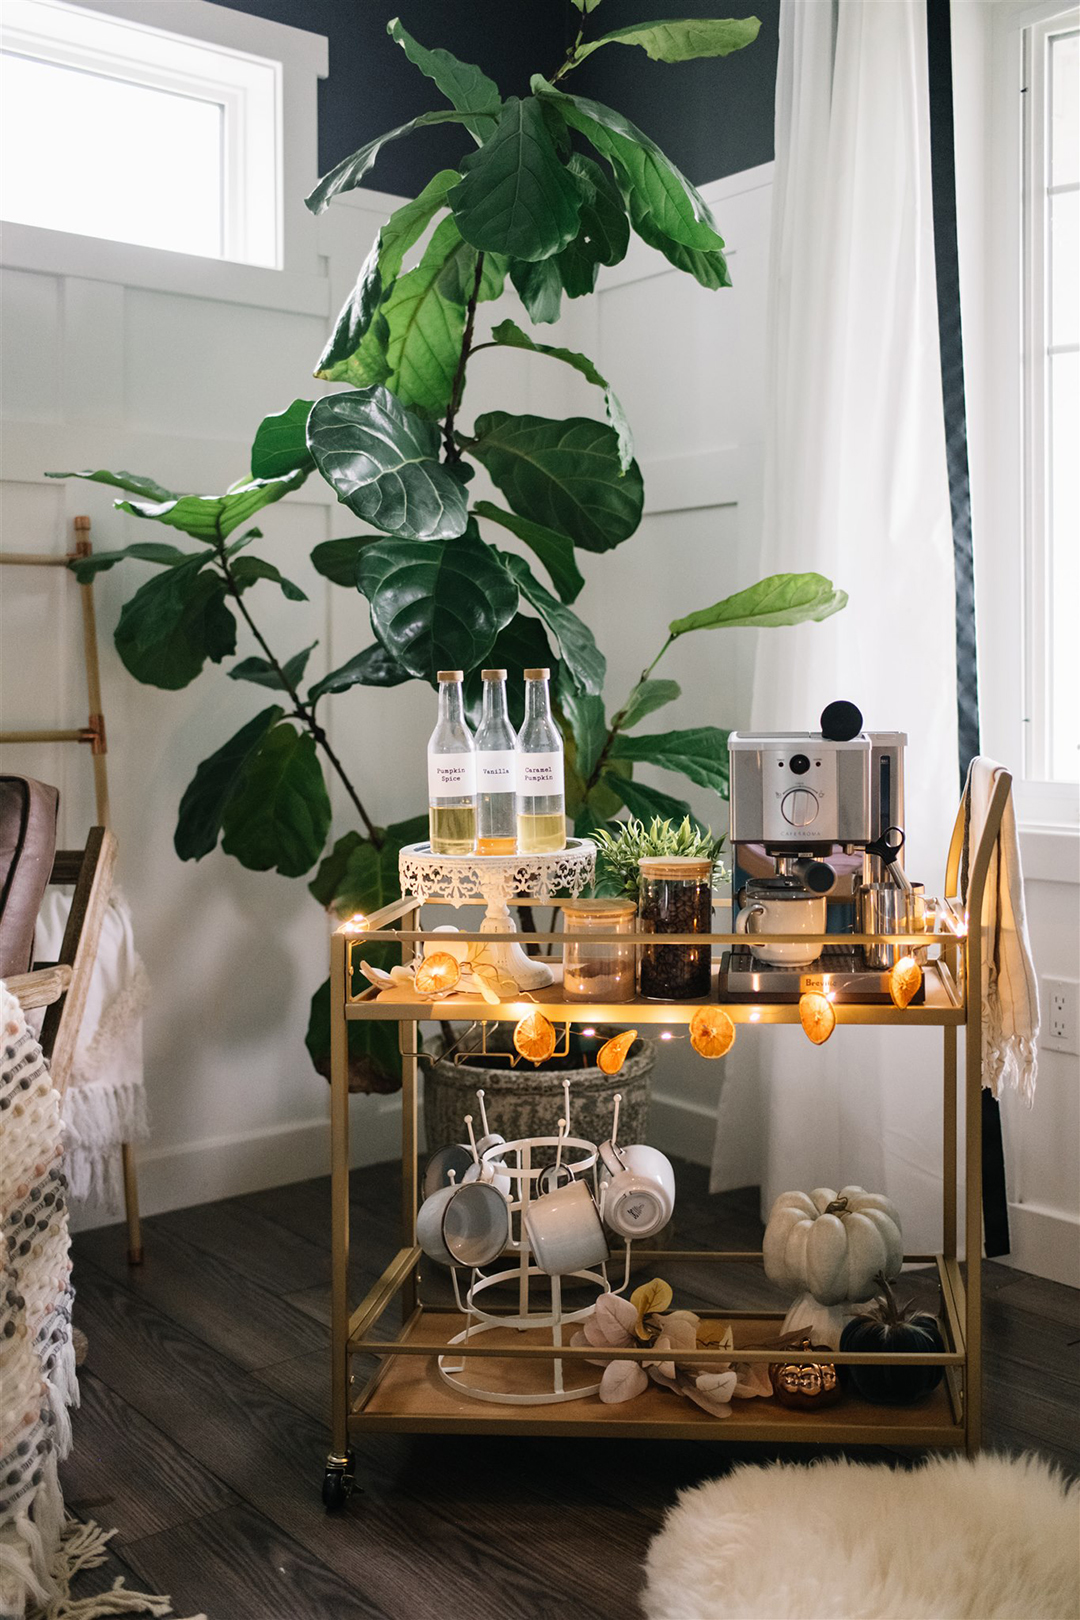 How to make a cozy coffee station at home with an Amazon bar cart